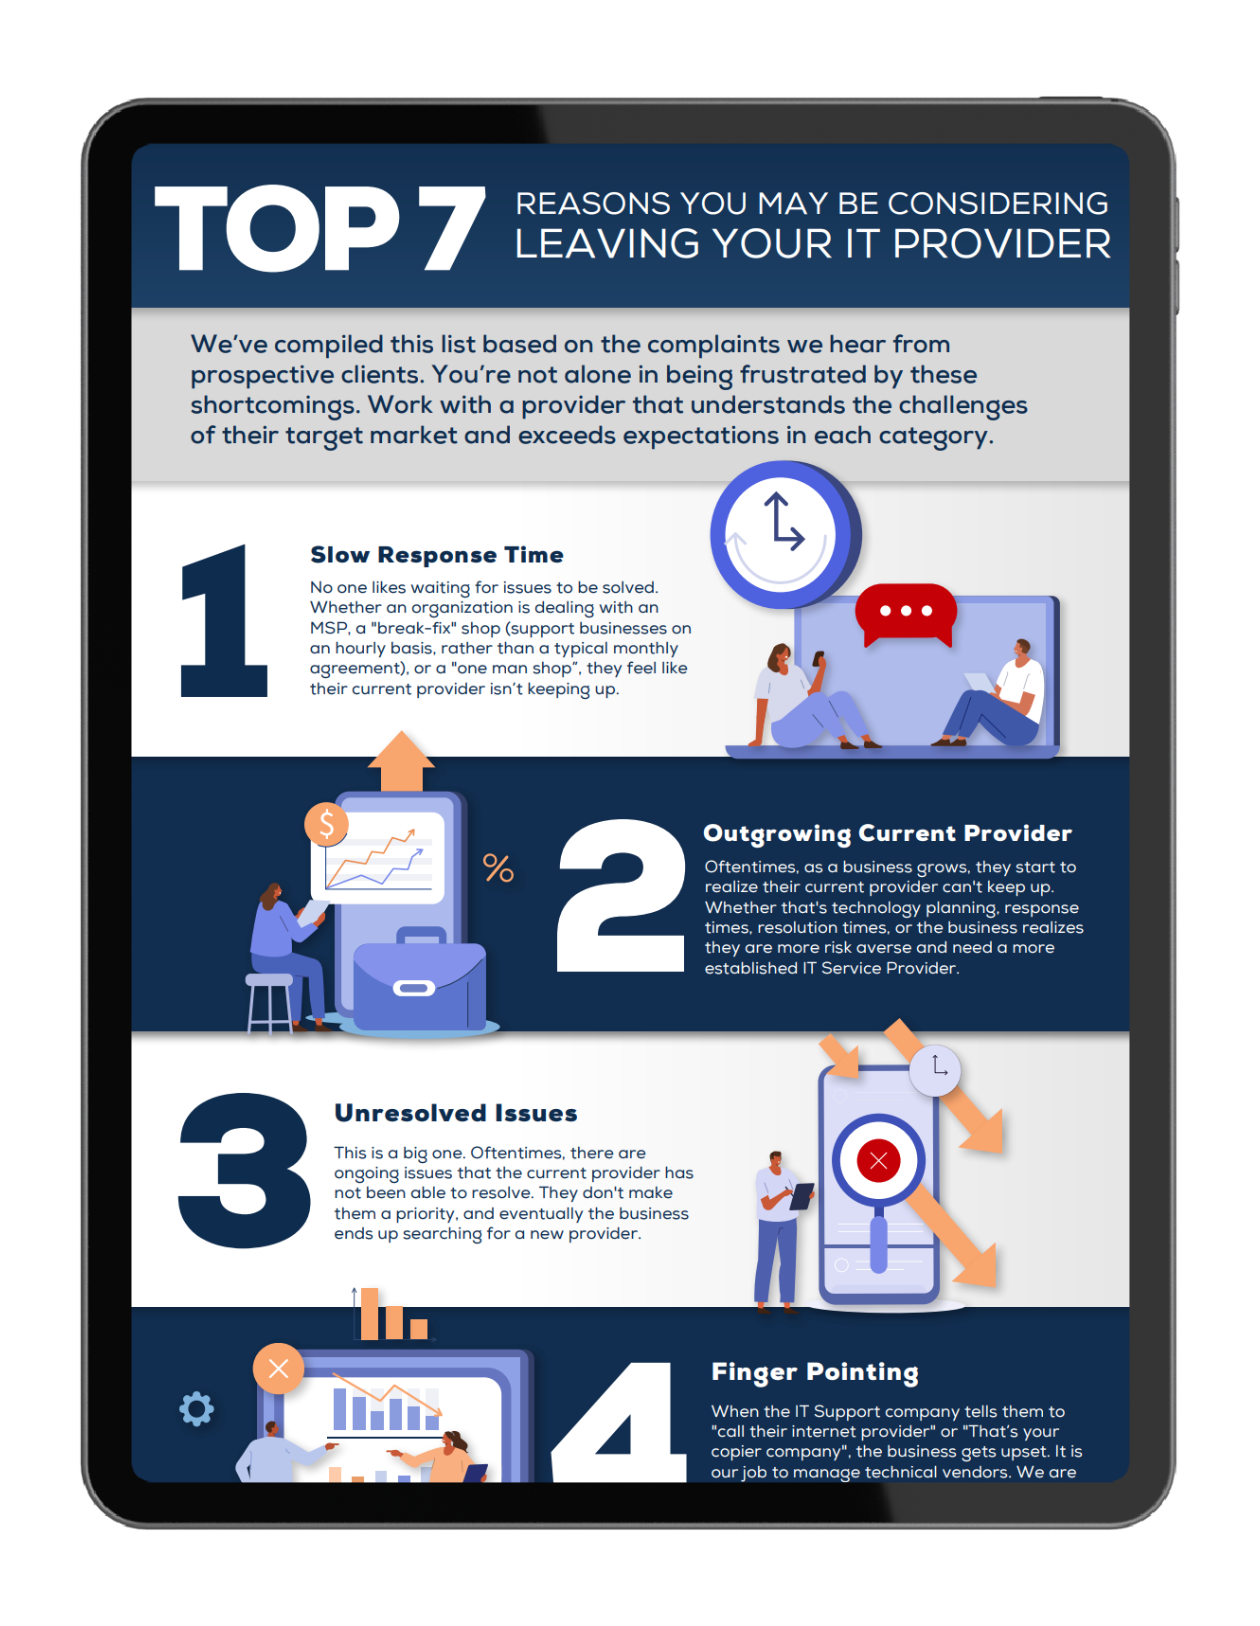 Top 7 Reasons You May Be Considering Leaving Your IT Provider